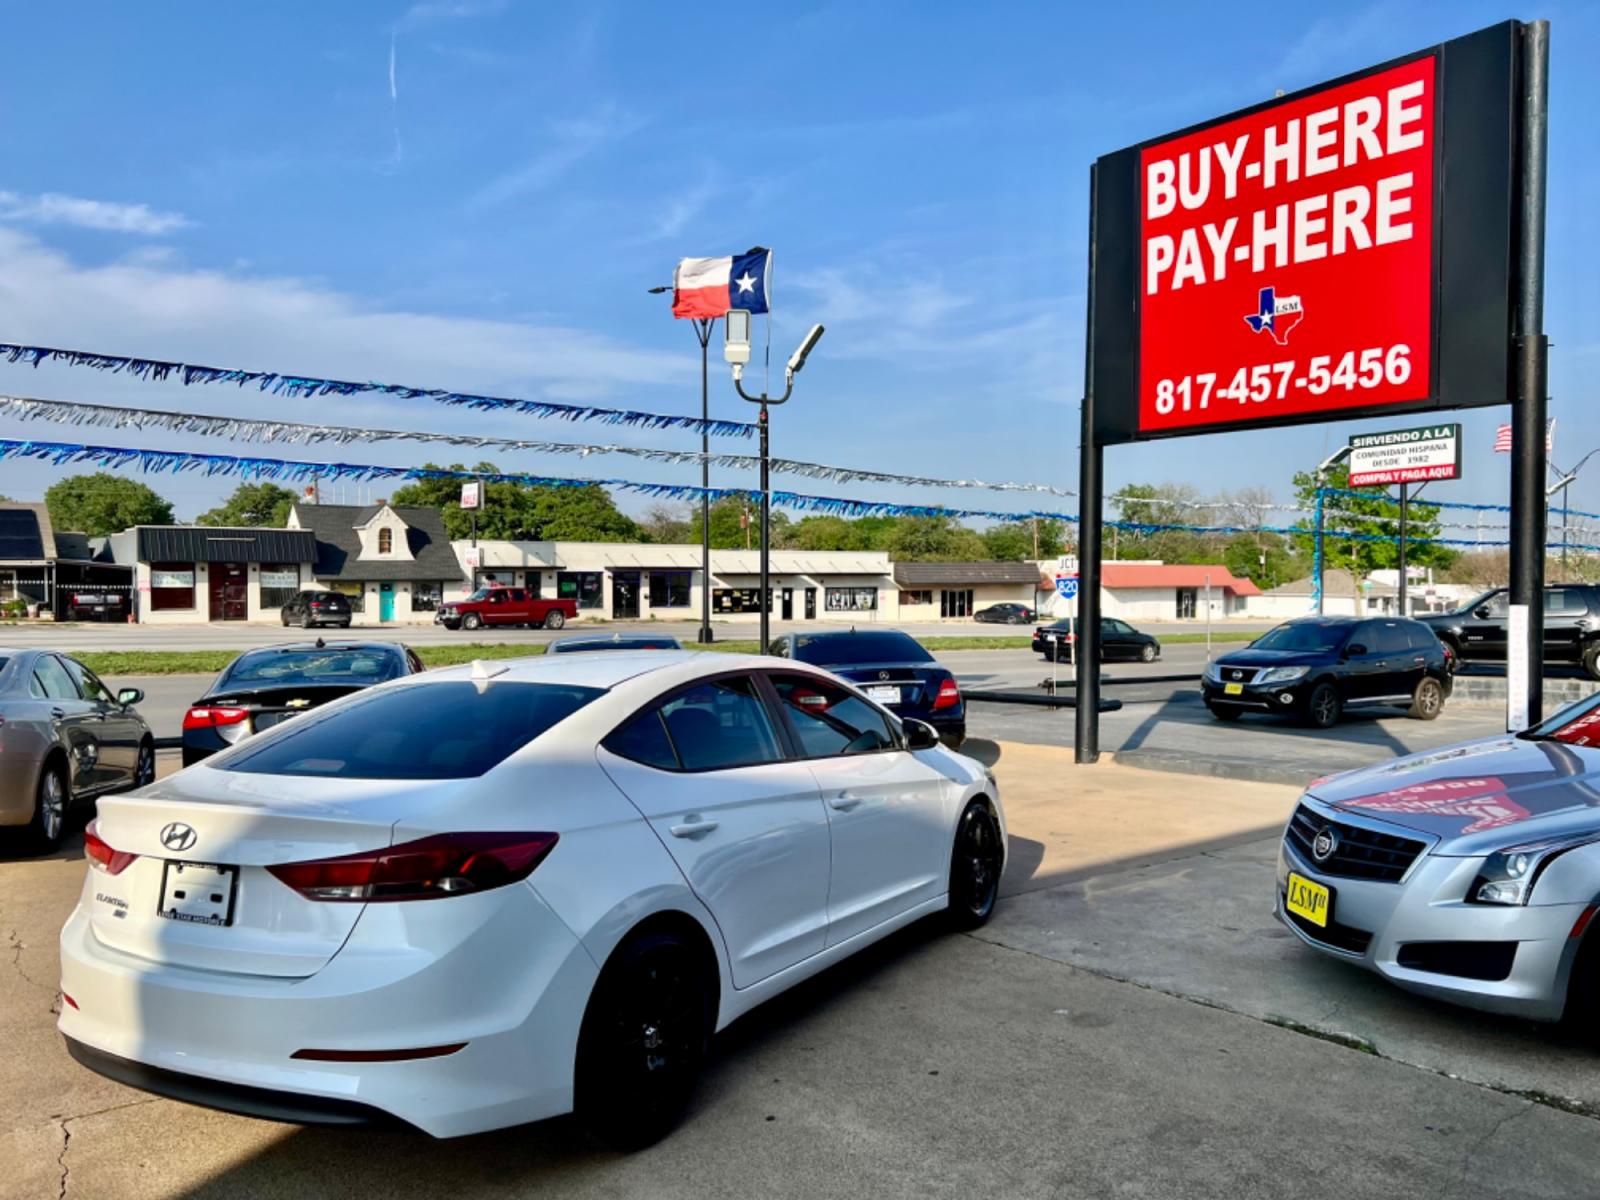 2017 WHITE HYUNDAI ELANTRA (5NPD74LF7HH) , located at 5900 E. Lancaster Ave., Fort Worth, TX, 76112, (817) 457-5456, 0.000000, 0.000000 - This is a 2017 HYUNDAI ELANTRA 4 DOOR SEDAN that is in excellent condition. There are no dents or scratches. The interior is clean with no rips or tears or stains. All power windows, door locks and seats. Ice cold AC for those hot Texas summer days. It is equipped with a CD player, AM/FM radio, AUX - Photo #5